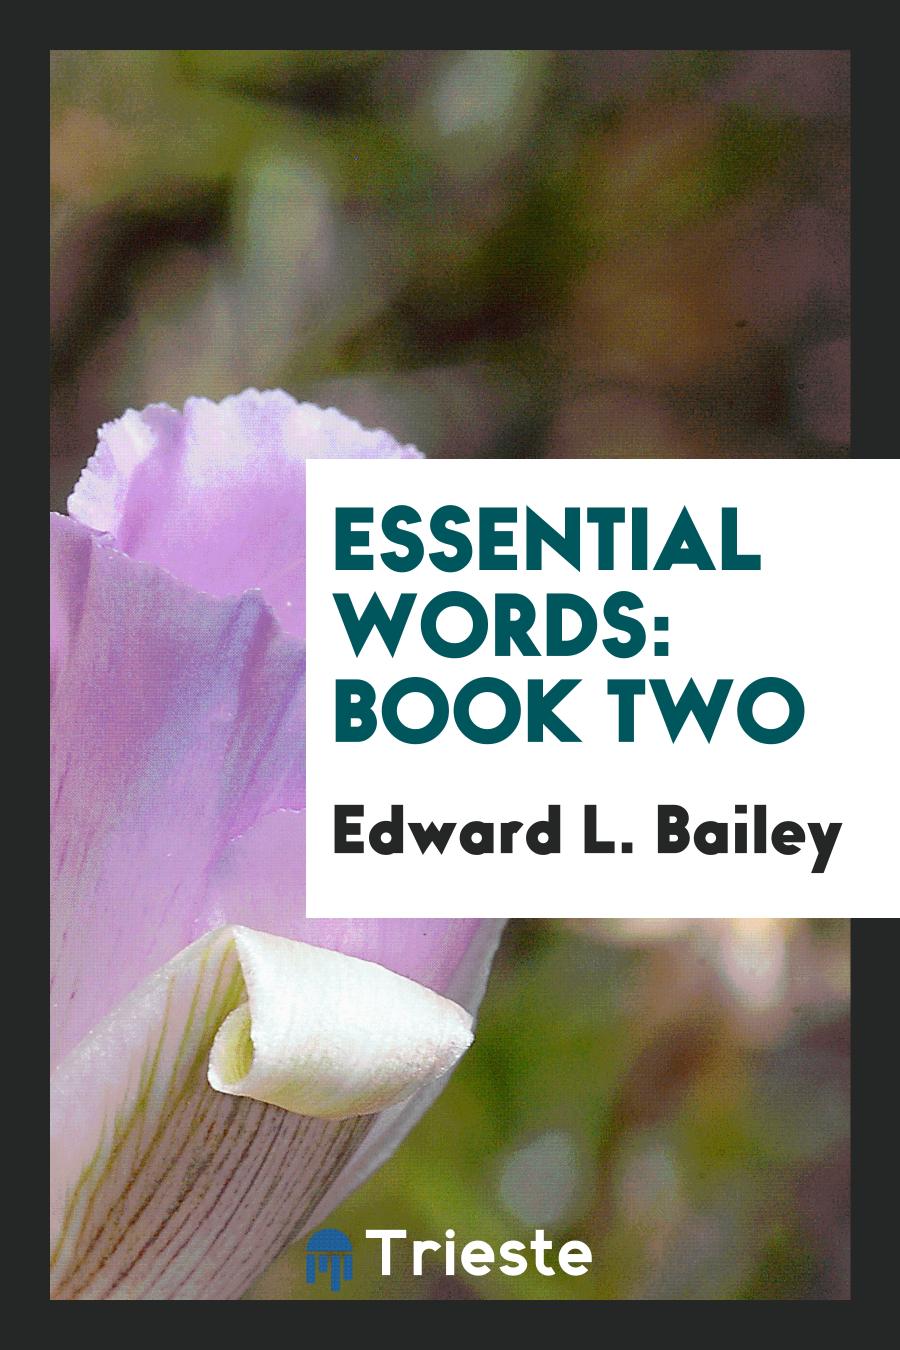 Essential Words: Book Two